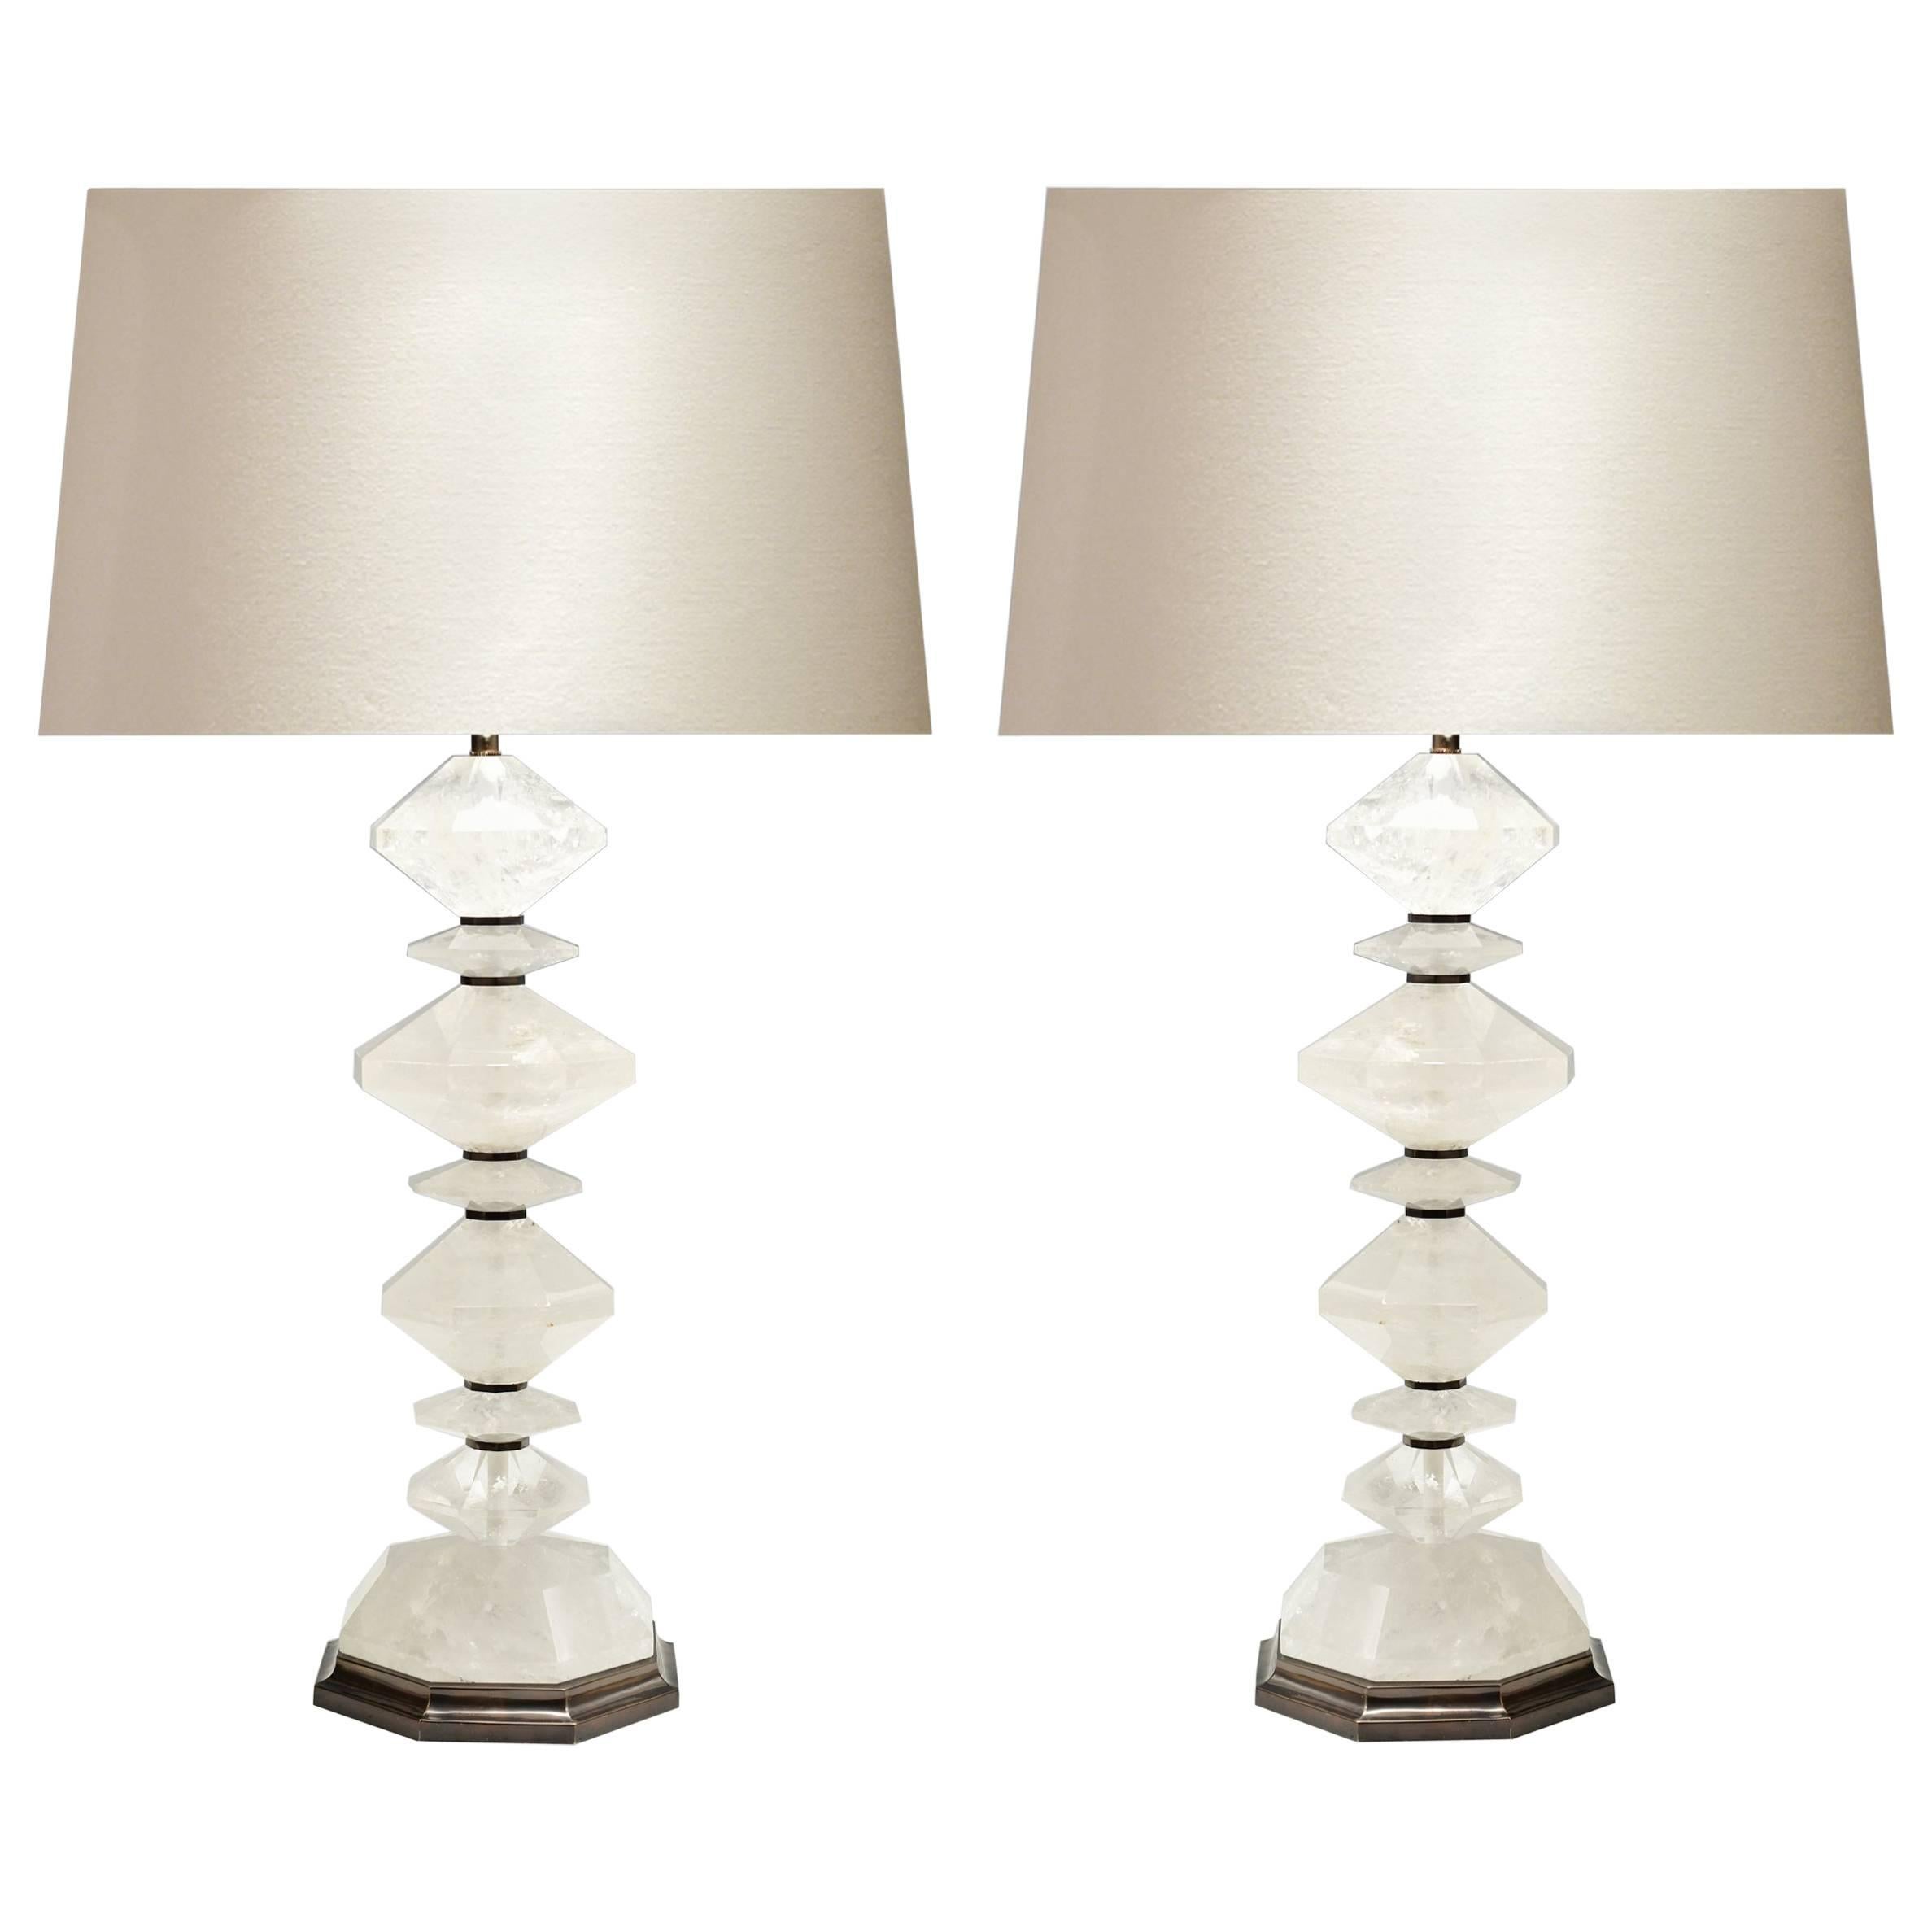 Pair of Diamond Form Rock Crystal Table Lamps